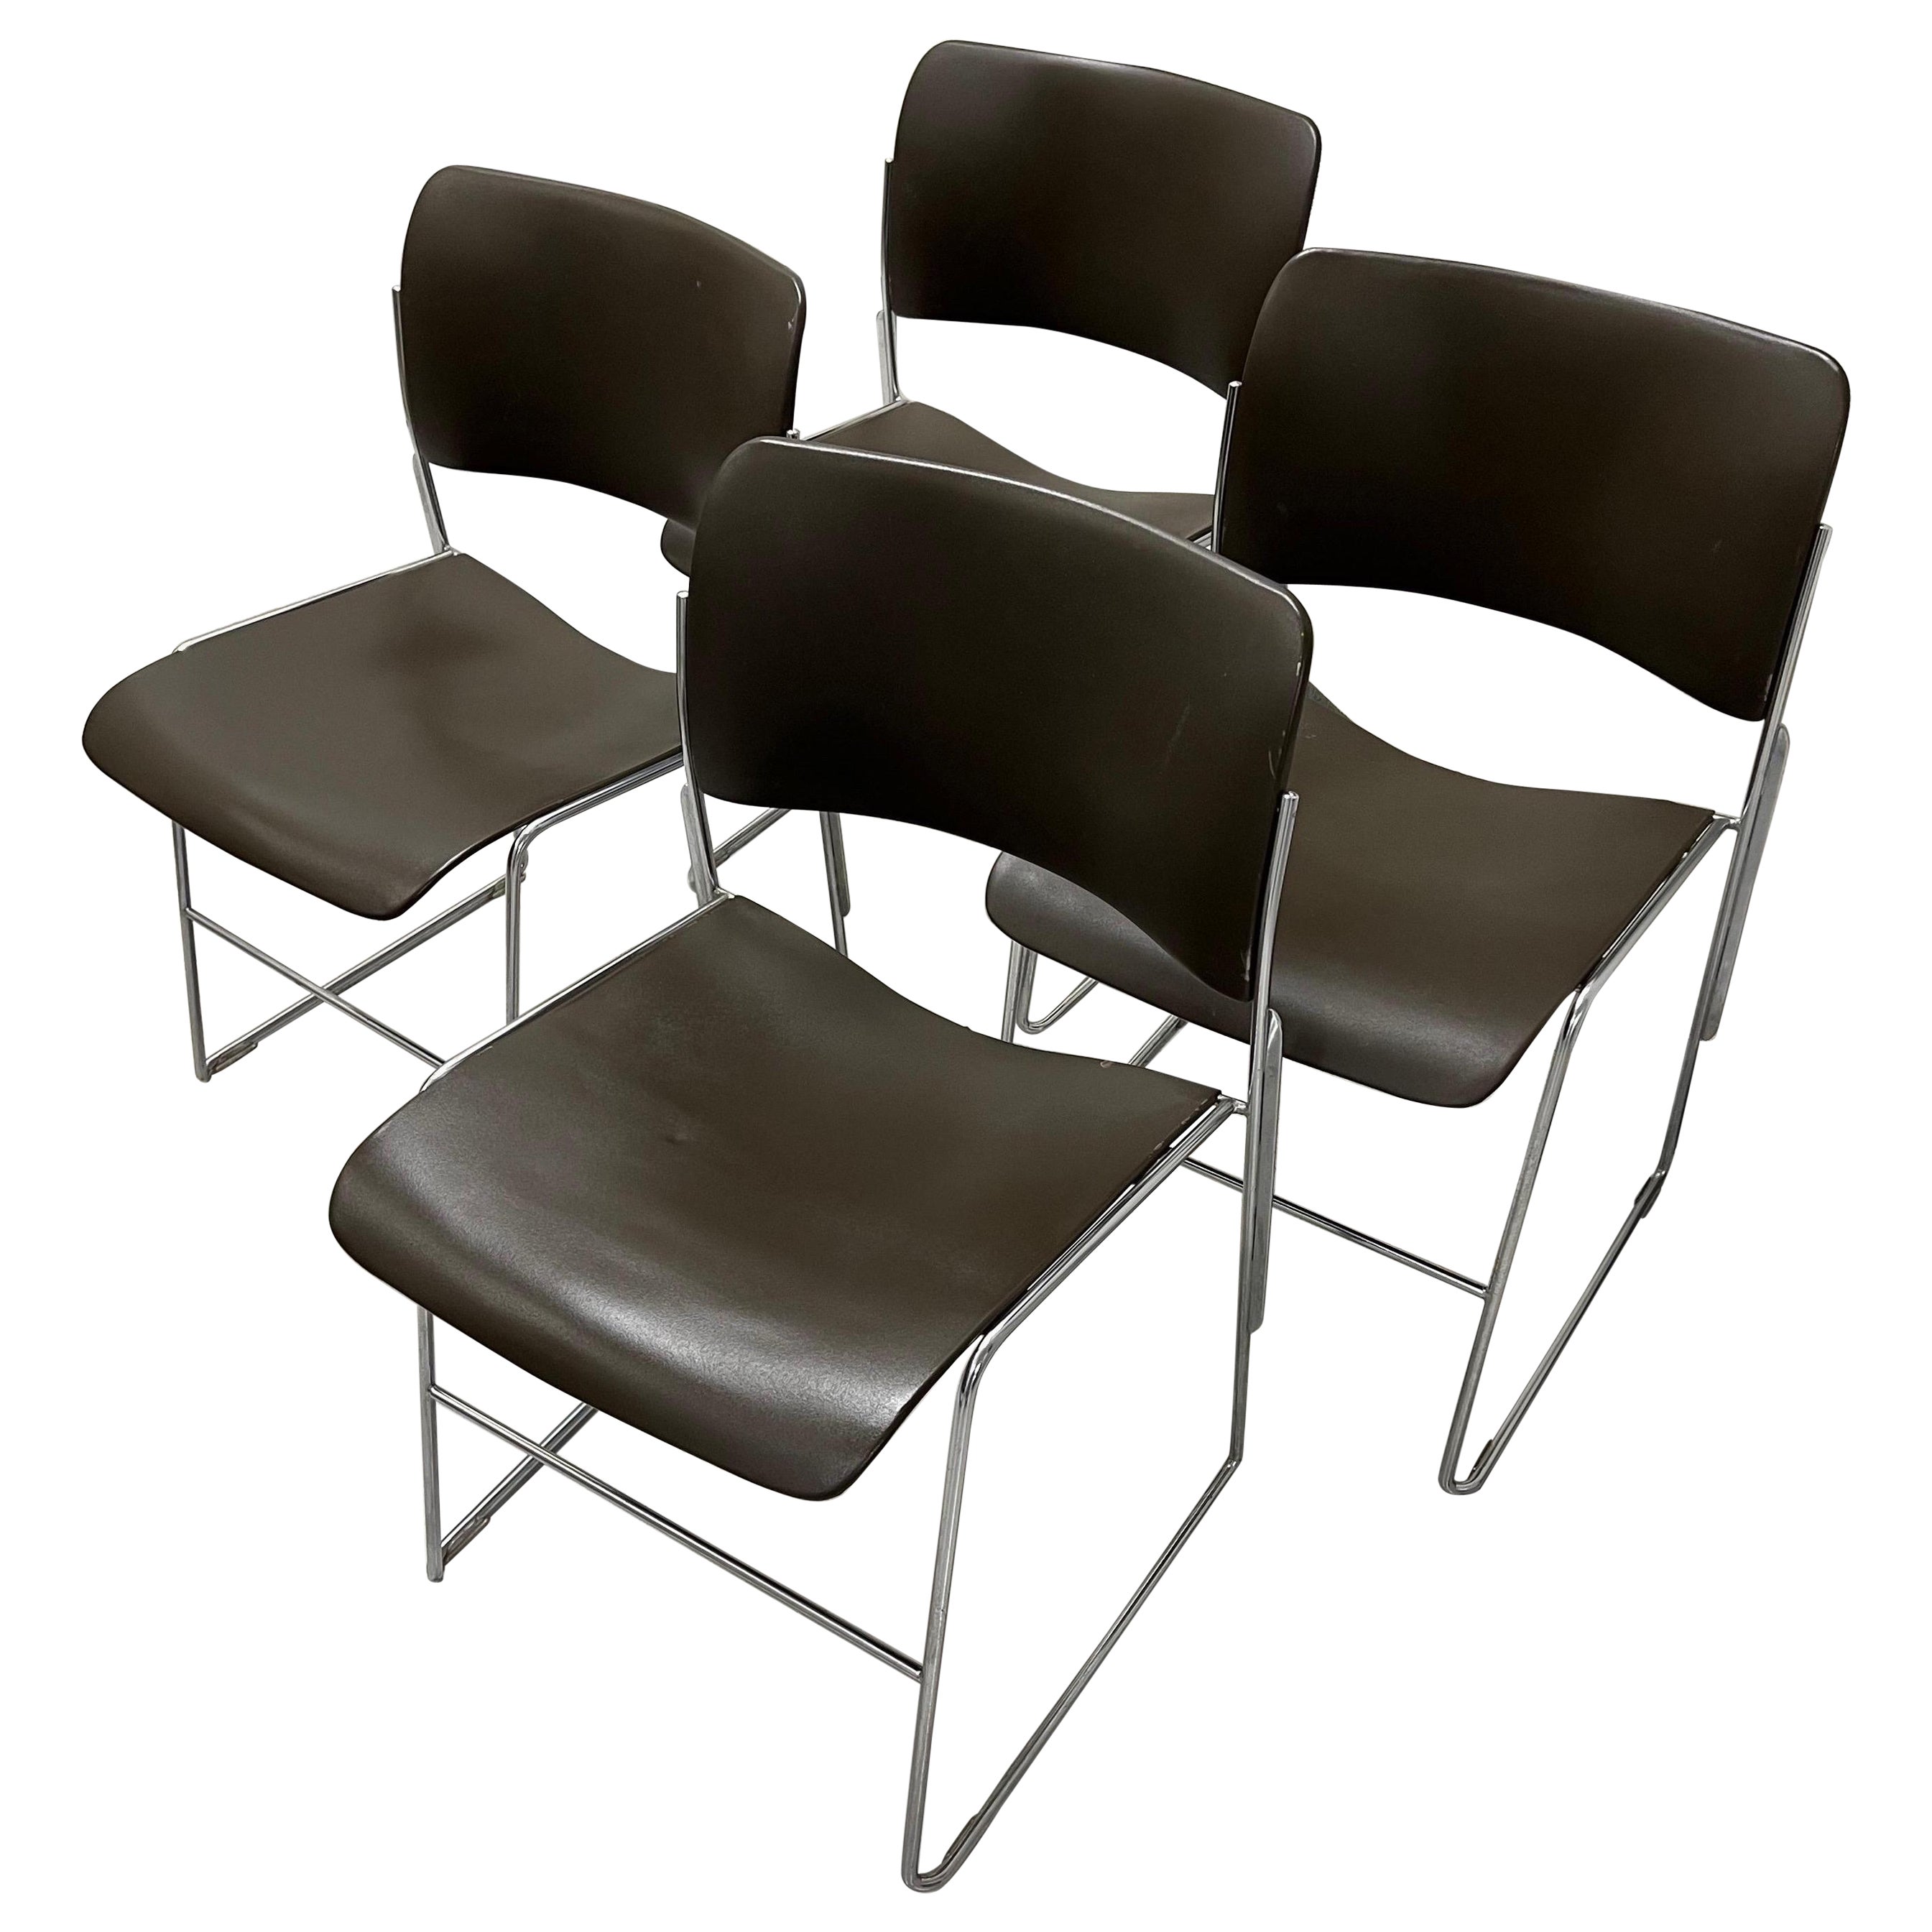 Set of 4 Stackable 40/4 Chairs By David Rowland in Dark Brown